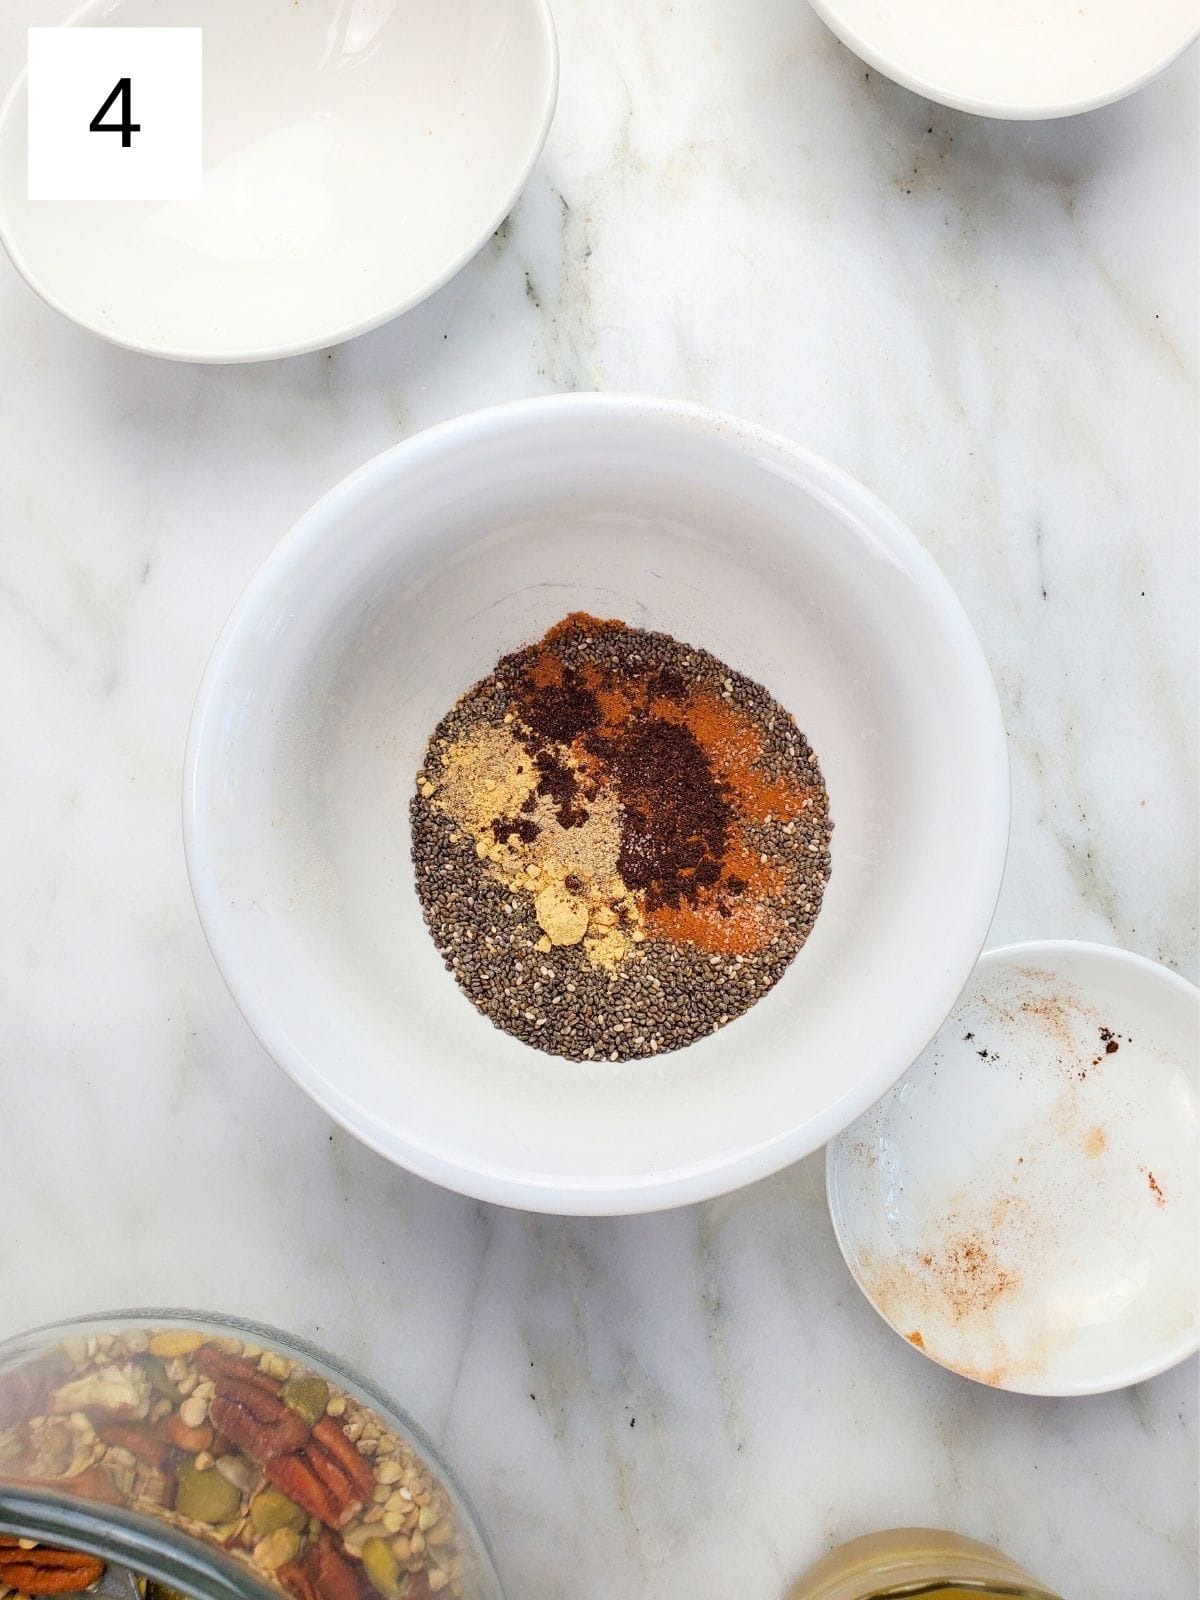 Chia seeds, vanilla powder, cinnamon, cardamom, and ginger powder combined in a single bowl.